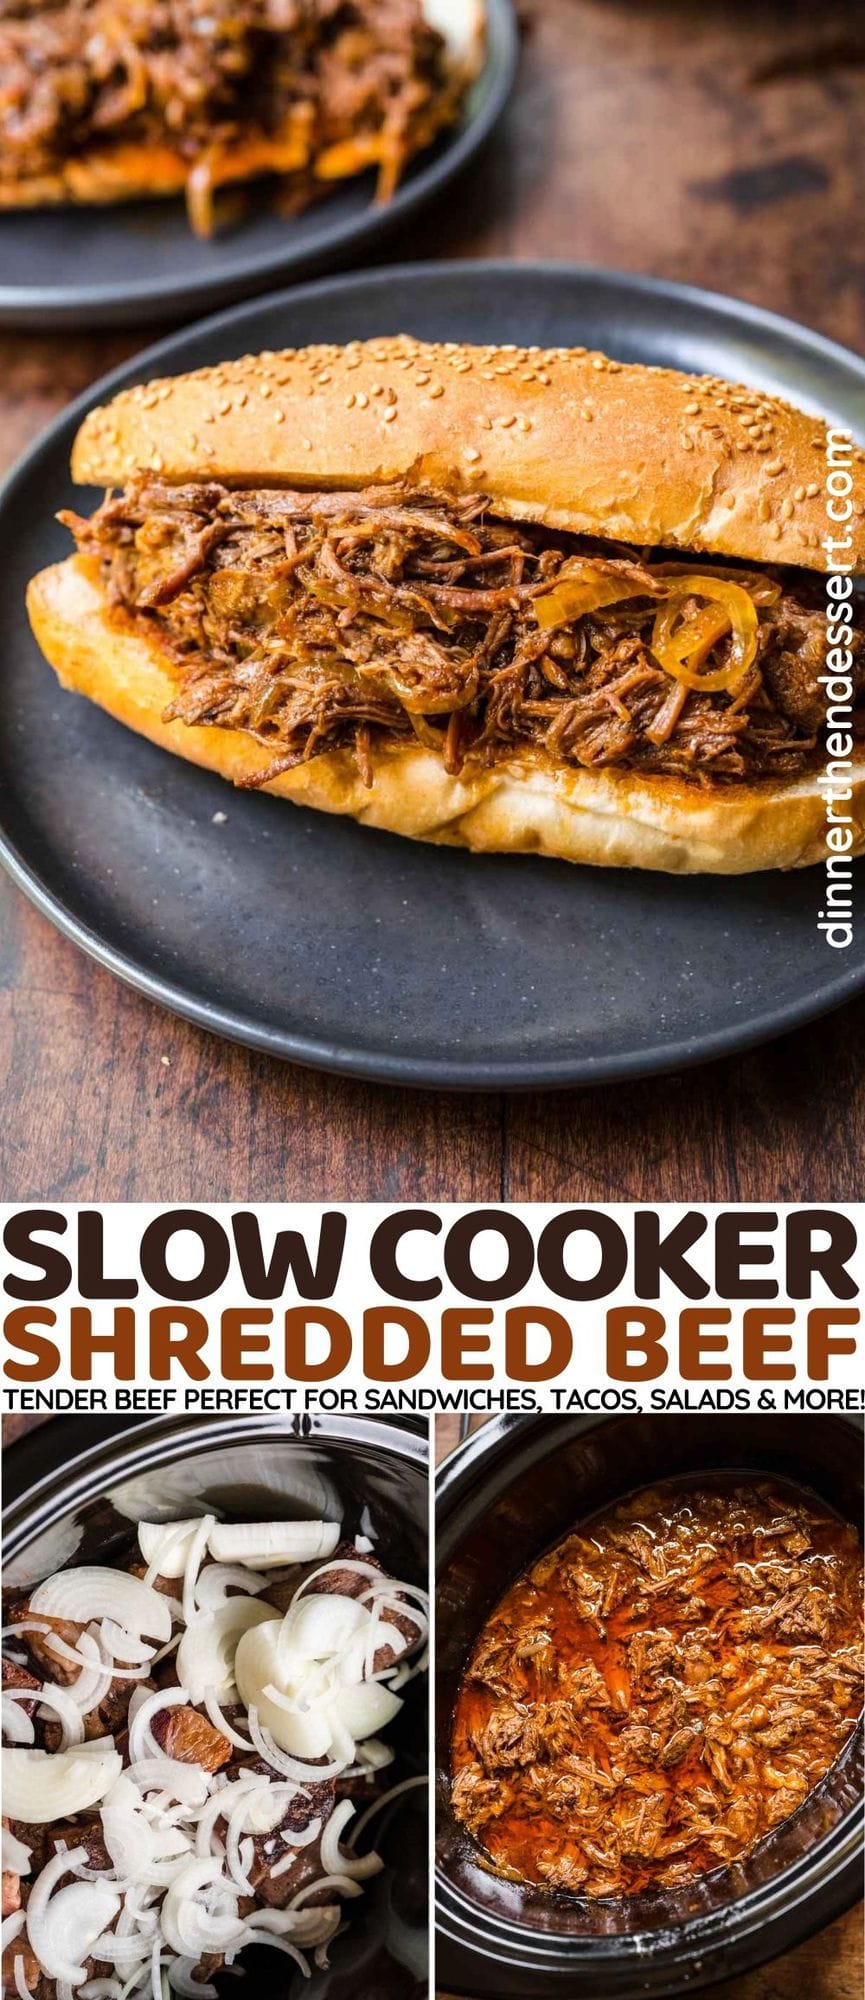 Slow Cooker Shredded Beef filling in hoagie roll on plate collage